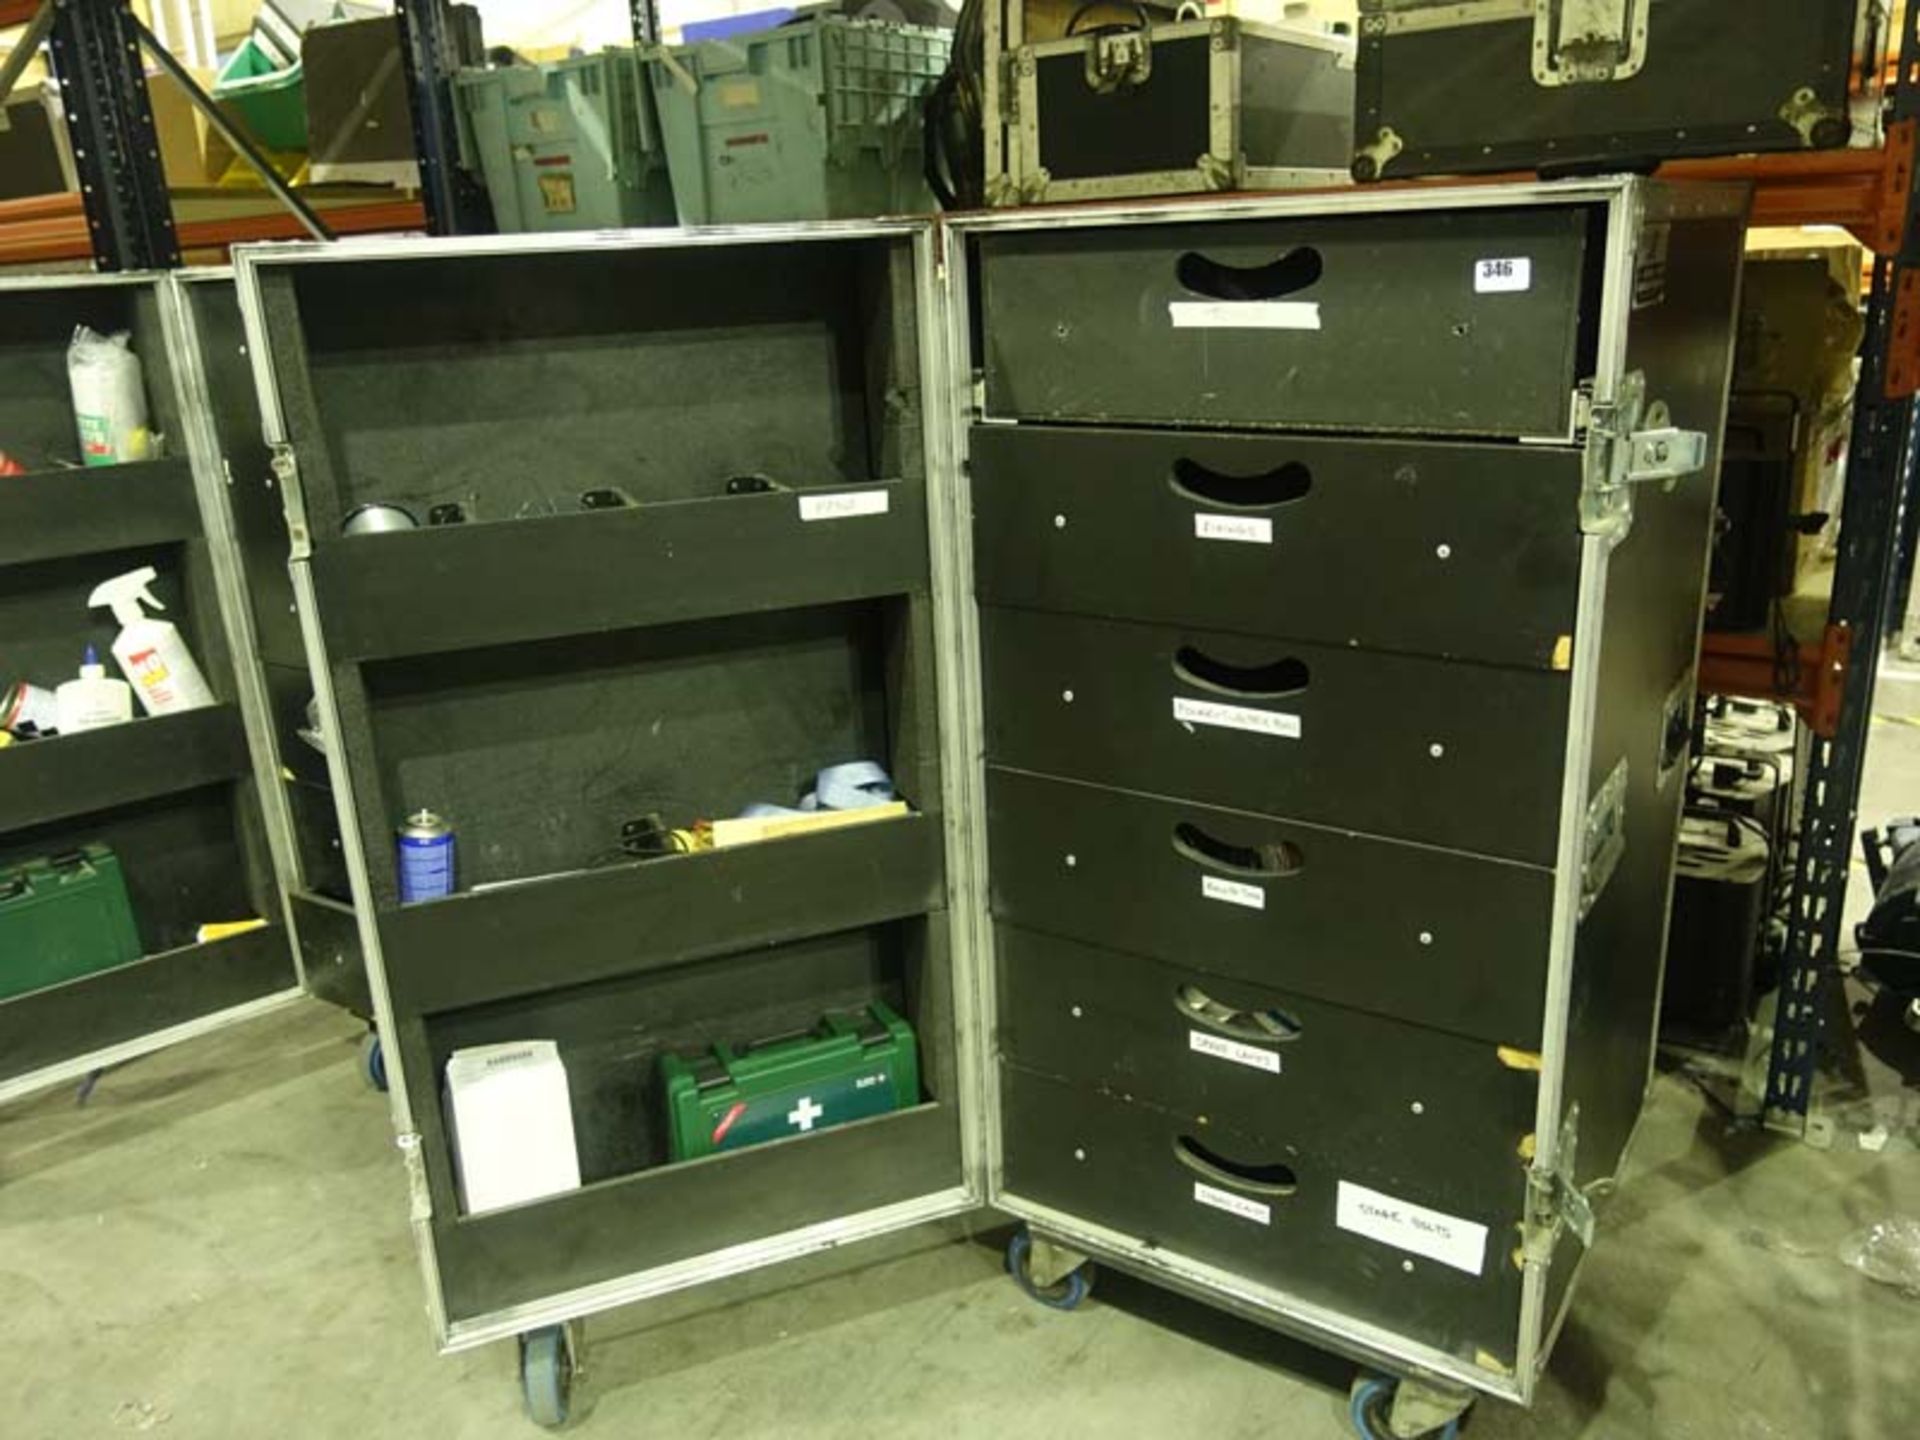 Wheeled freight case containing Production Box Equipment including hand tools, fixings, tape, clamps